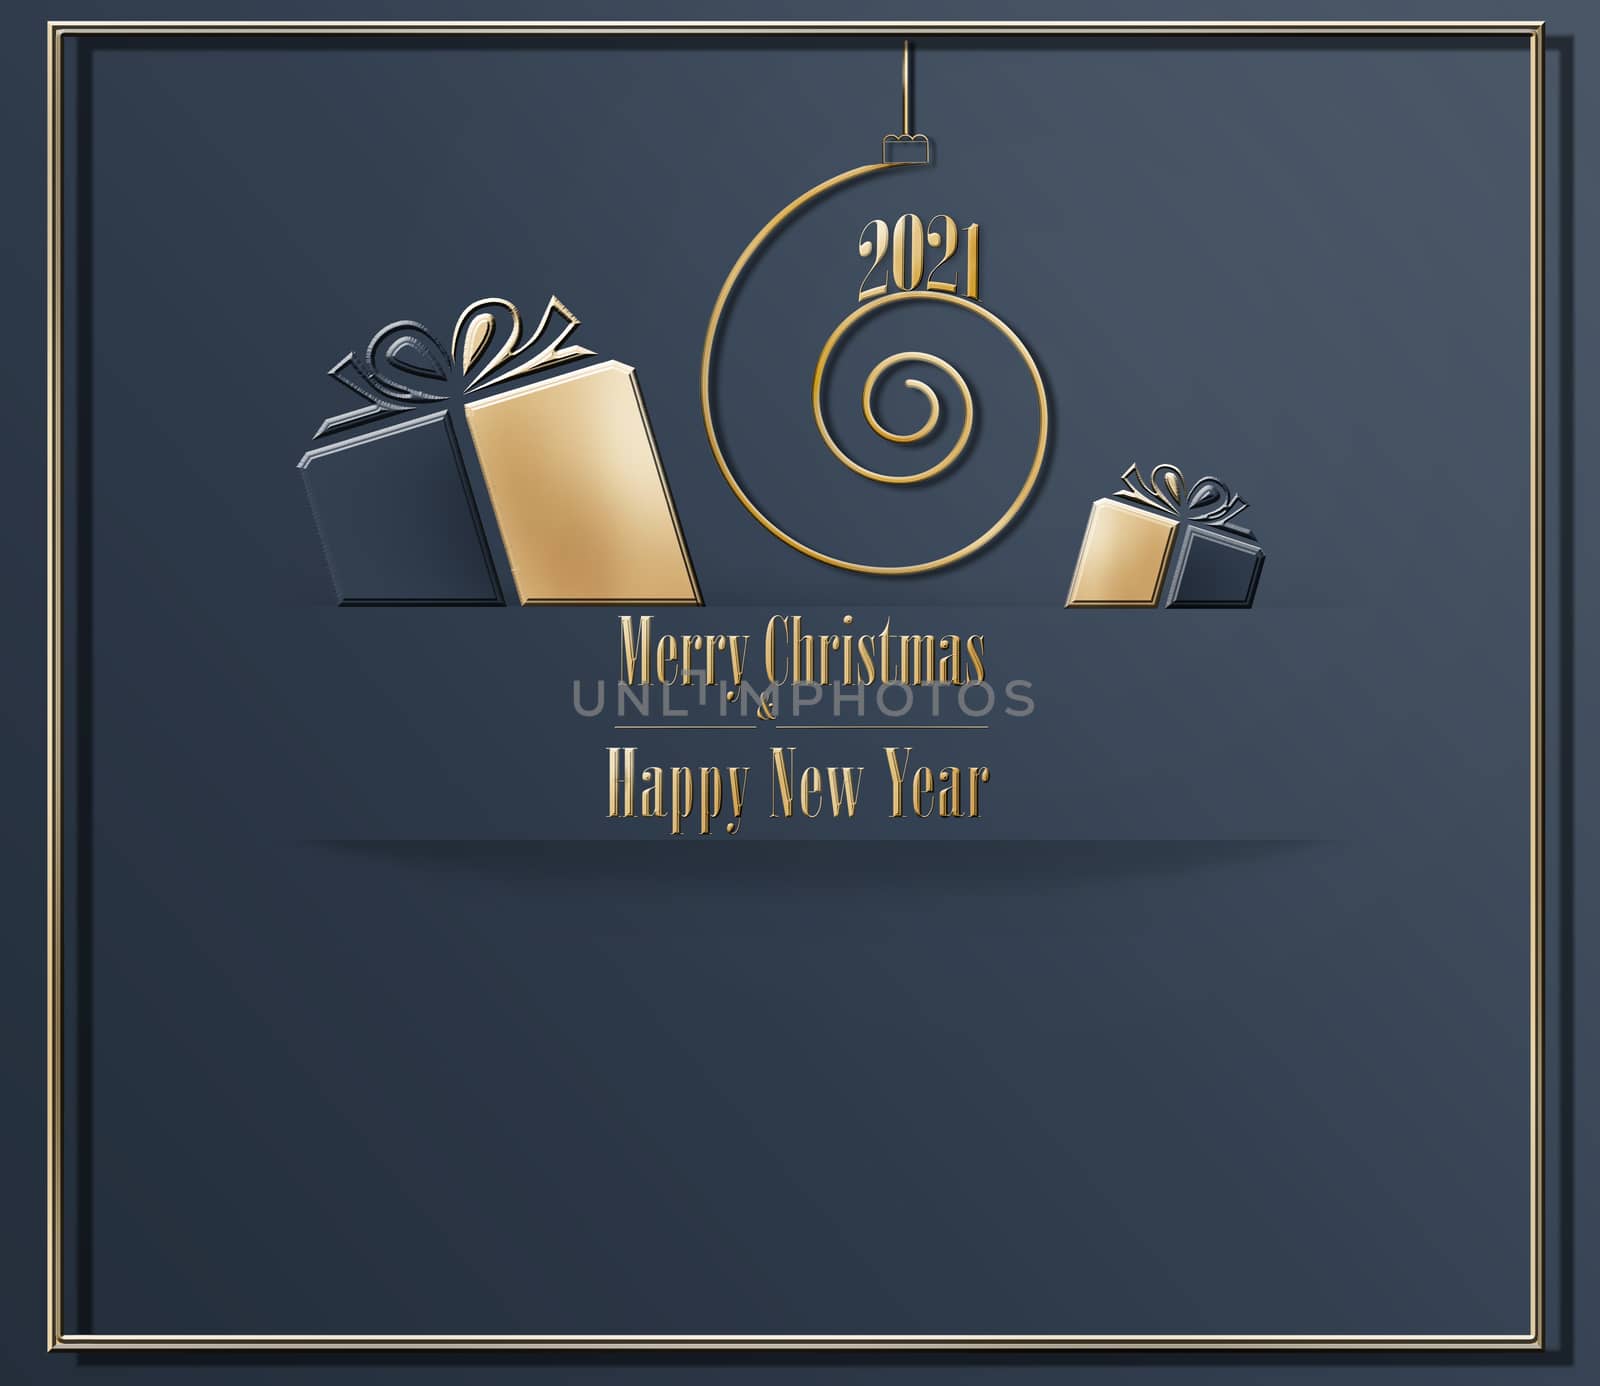 Elegant luxury stylish 2021 Merry Christmas Happy New Year card in dark blue colour with golden gift boxes, golden frame and shiny 2021 on golden spiral. 3D Illustration